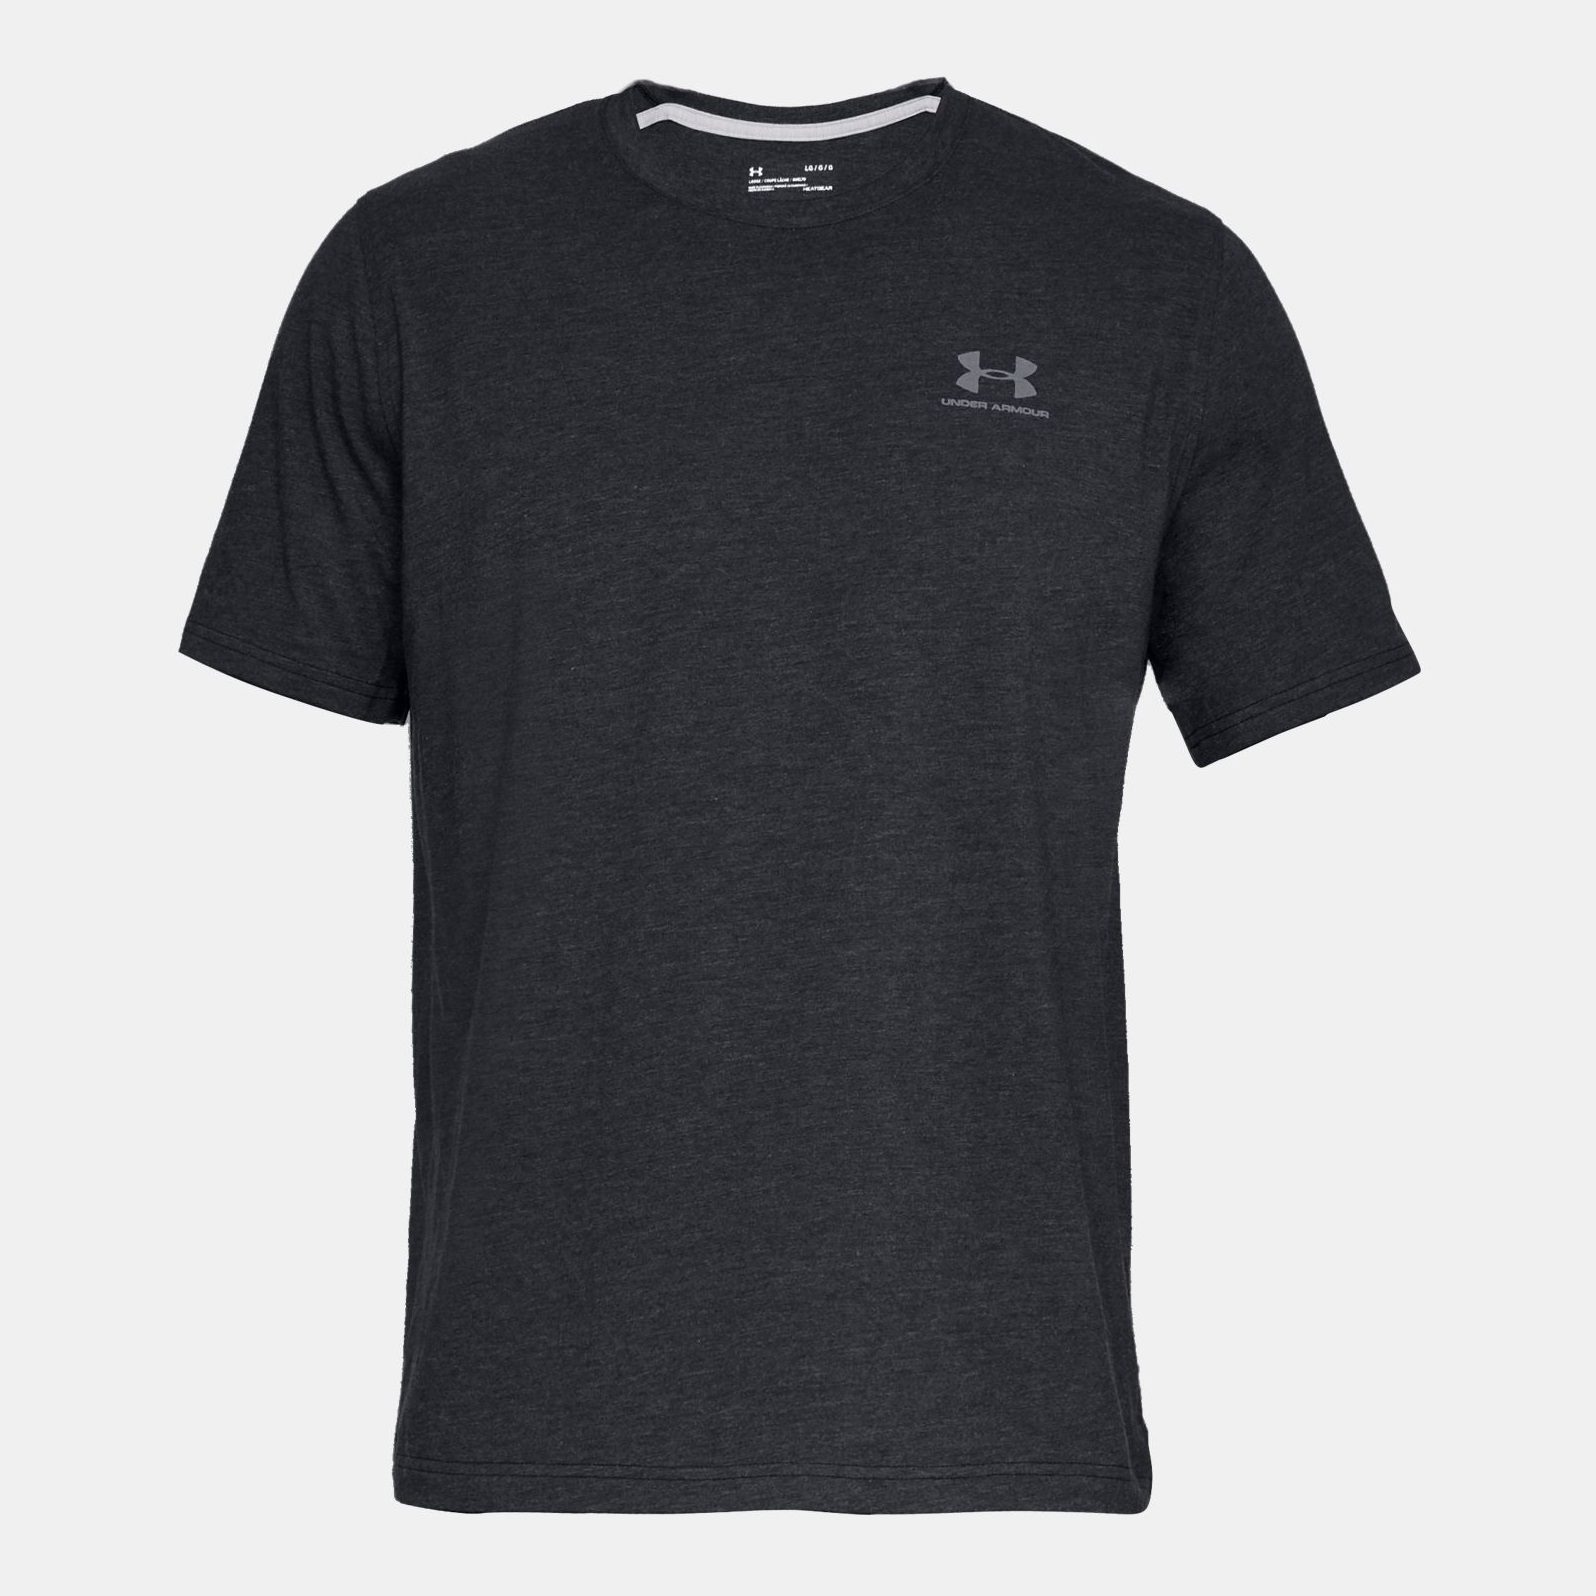 T-Shirts & Polo -  under armour CC Left Chest Lockup Shirt 7616